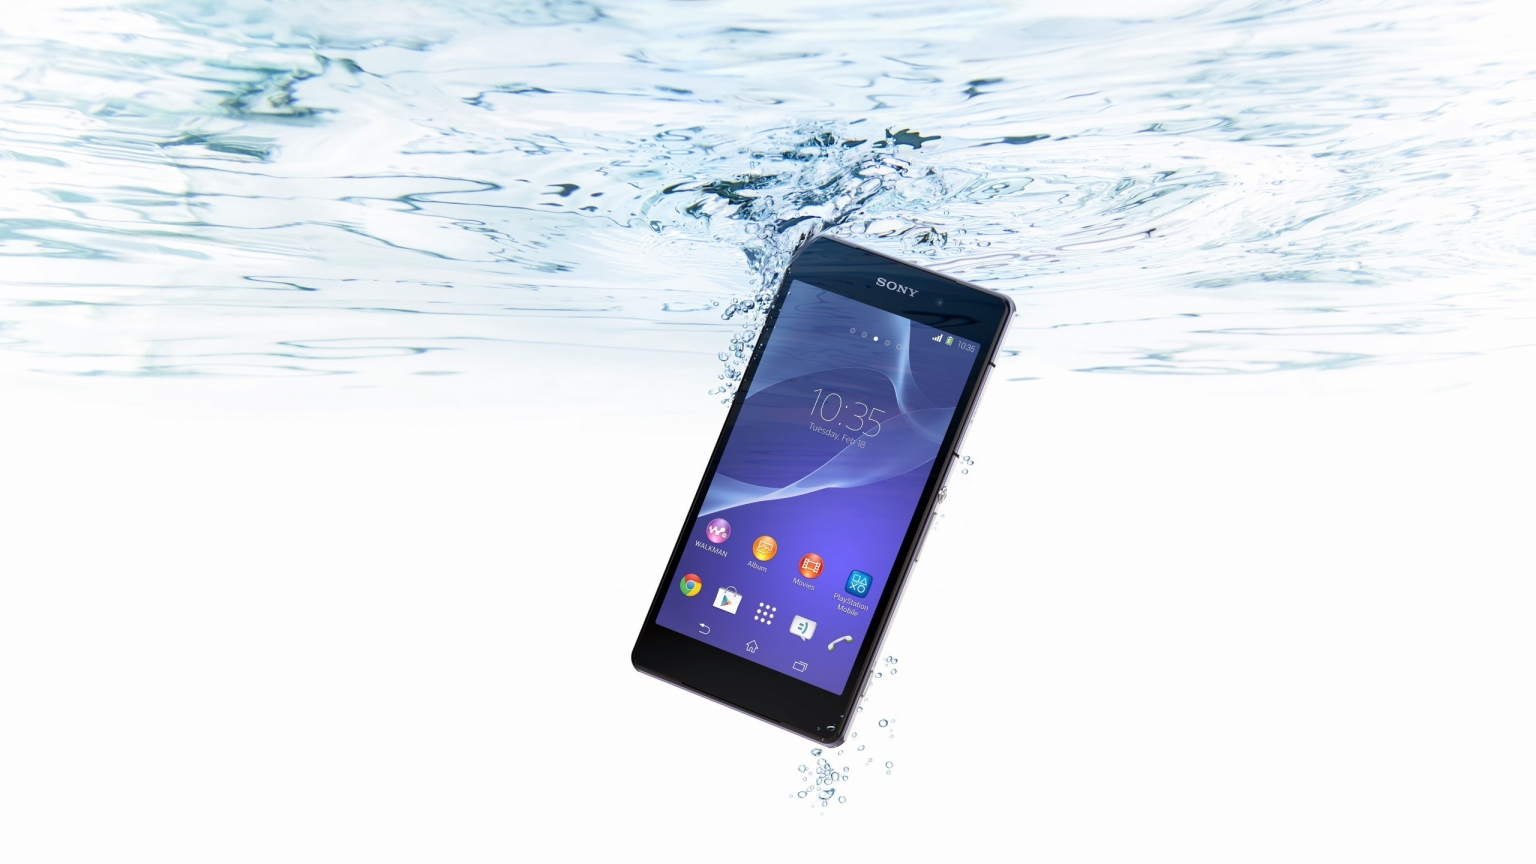 Sony Xperia Z2 Waterproof for 1536 x 864 HDTV resolution